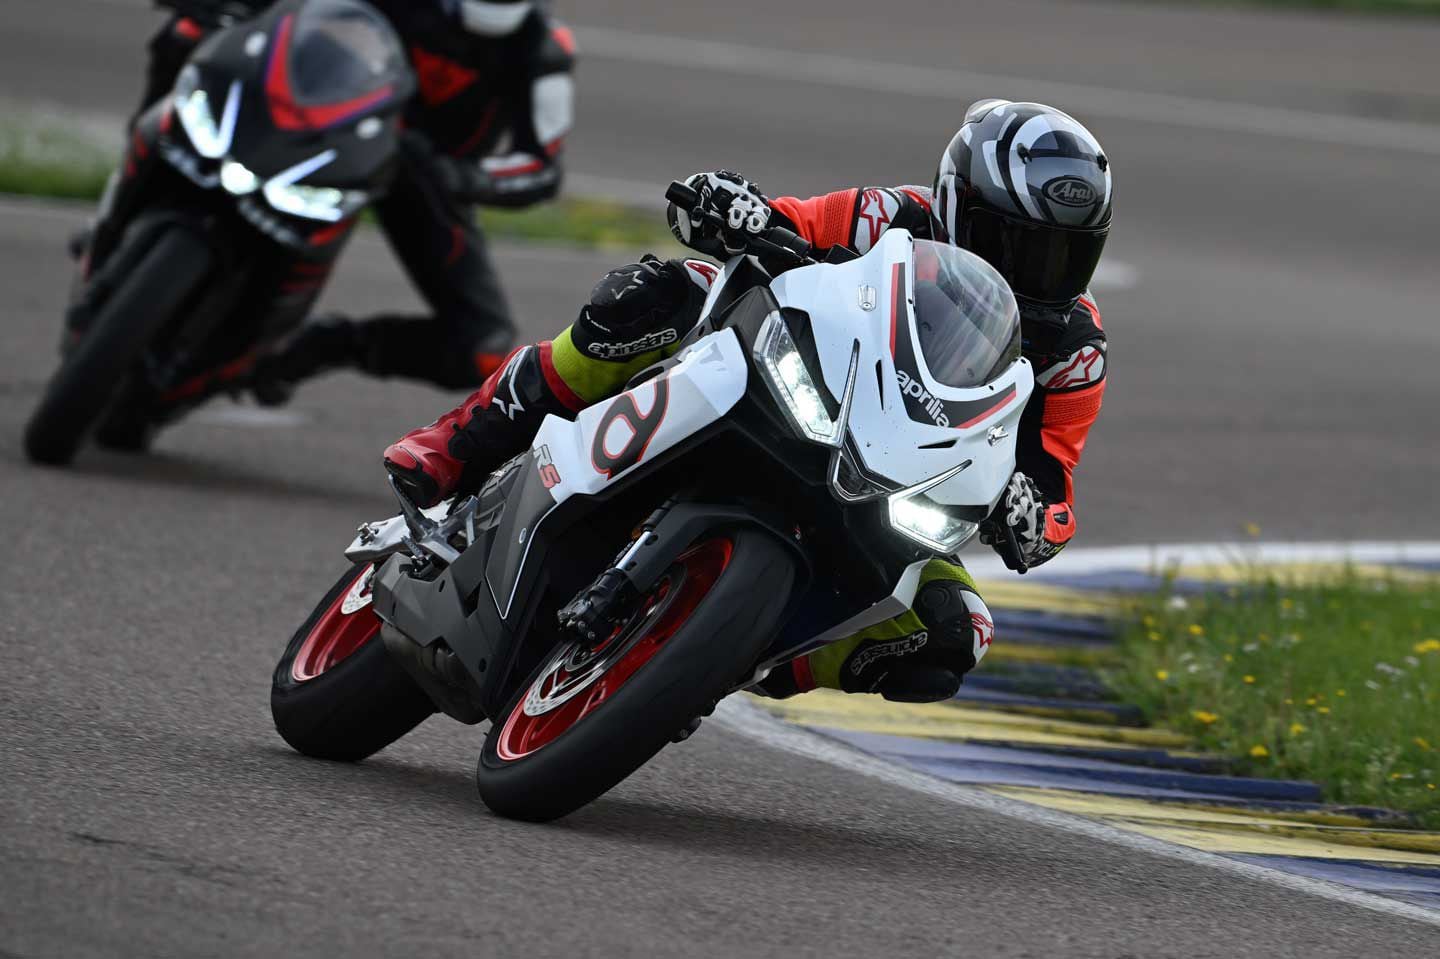 During our test at Autodromo di Modena the RS 457′s 17-inch wheels were fitted with aftermarket Pirelli Supercorsa V4 SP tires on warmers, adding to the sportbike’s impressive front end feel.